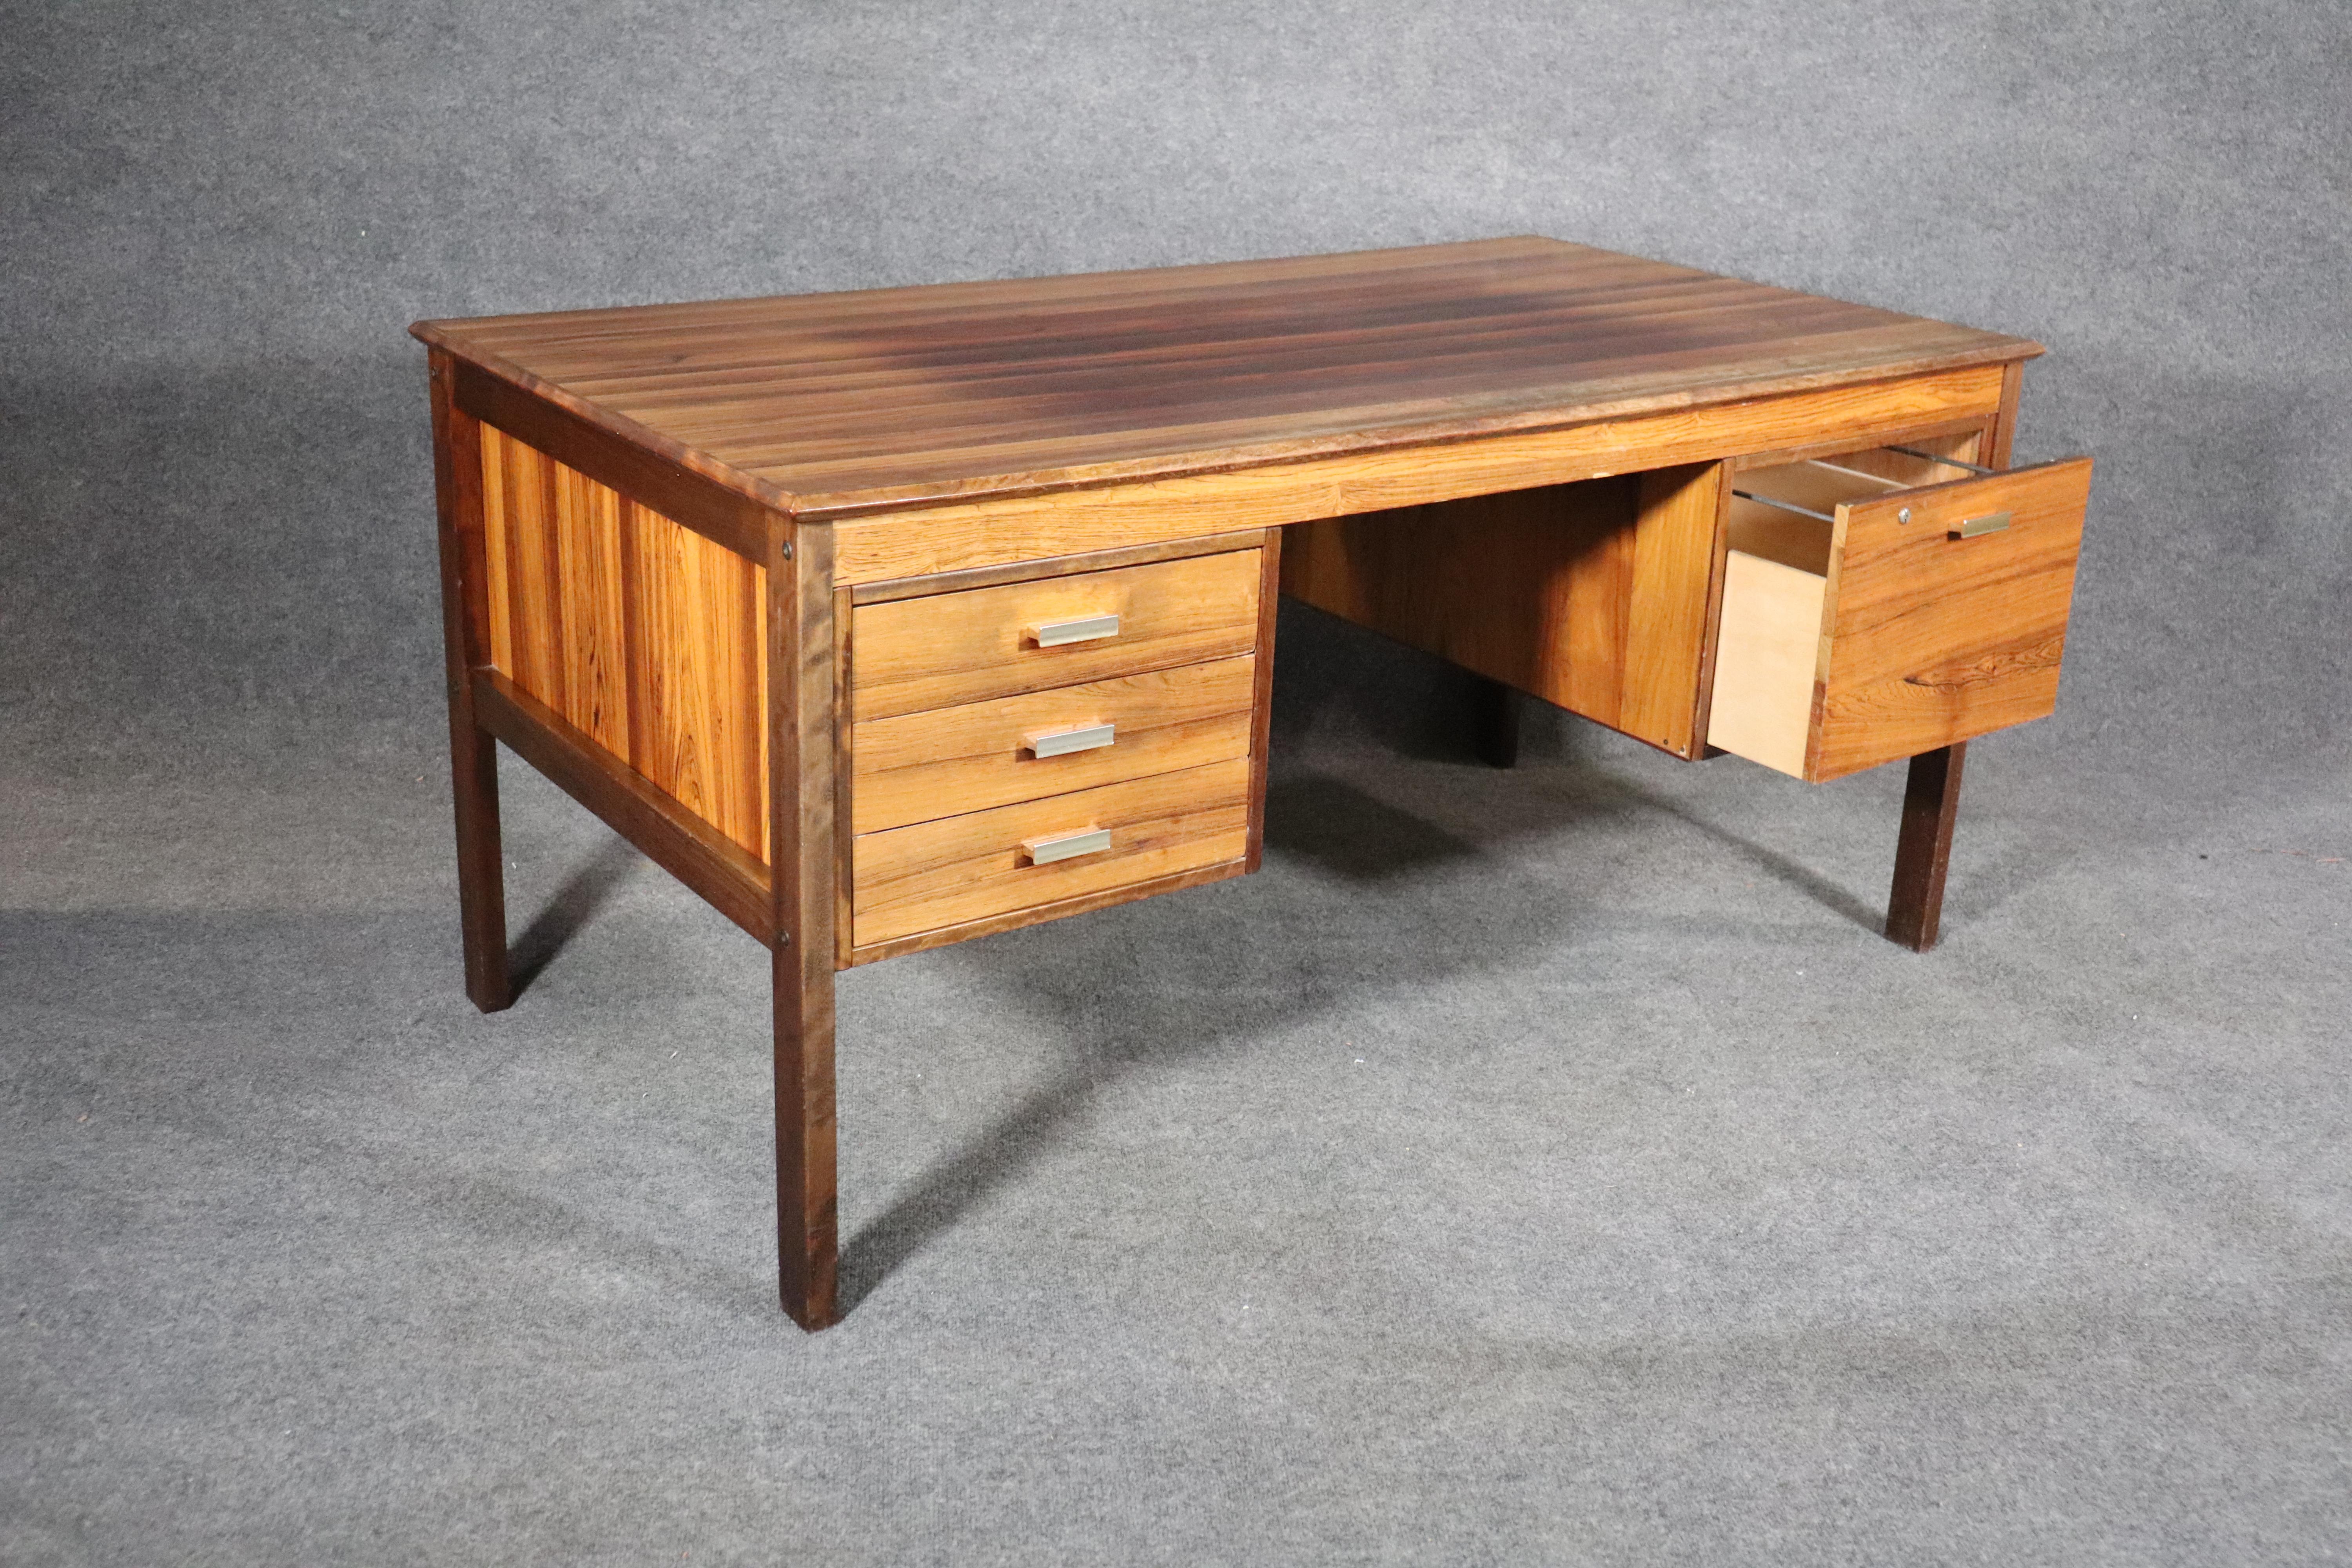 Stunning rosewood desk made by Farsø Stolefabrik For Maurice Villency. Deep wood grain throughout with accenting metal pulls, and finished back.
Please confirm location.